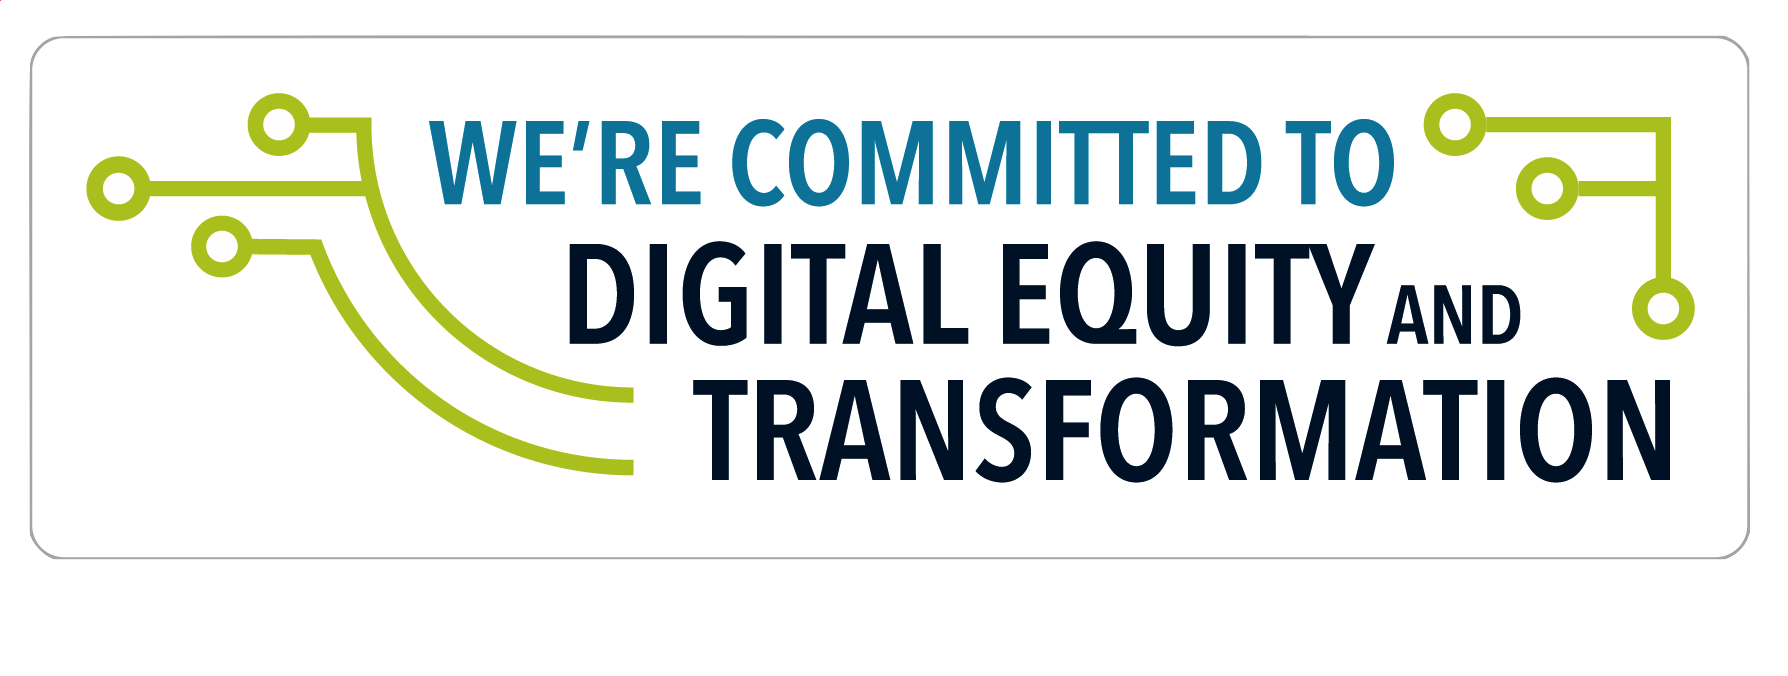 ISTE Pledge for Digital Equity and Transformation